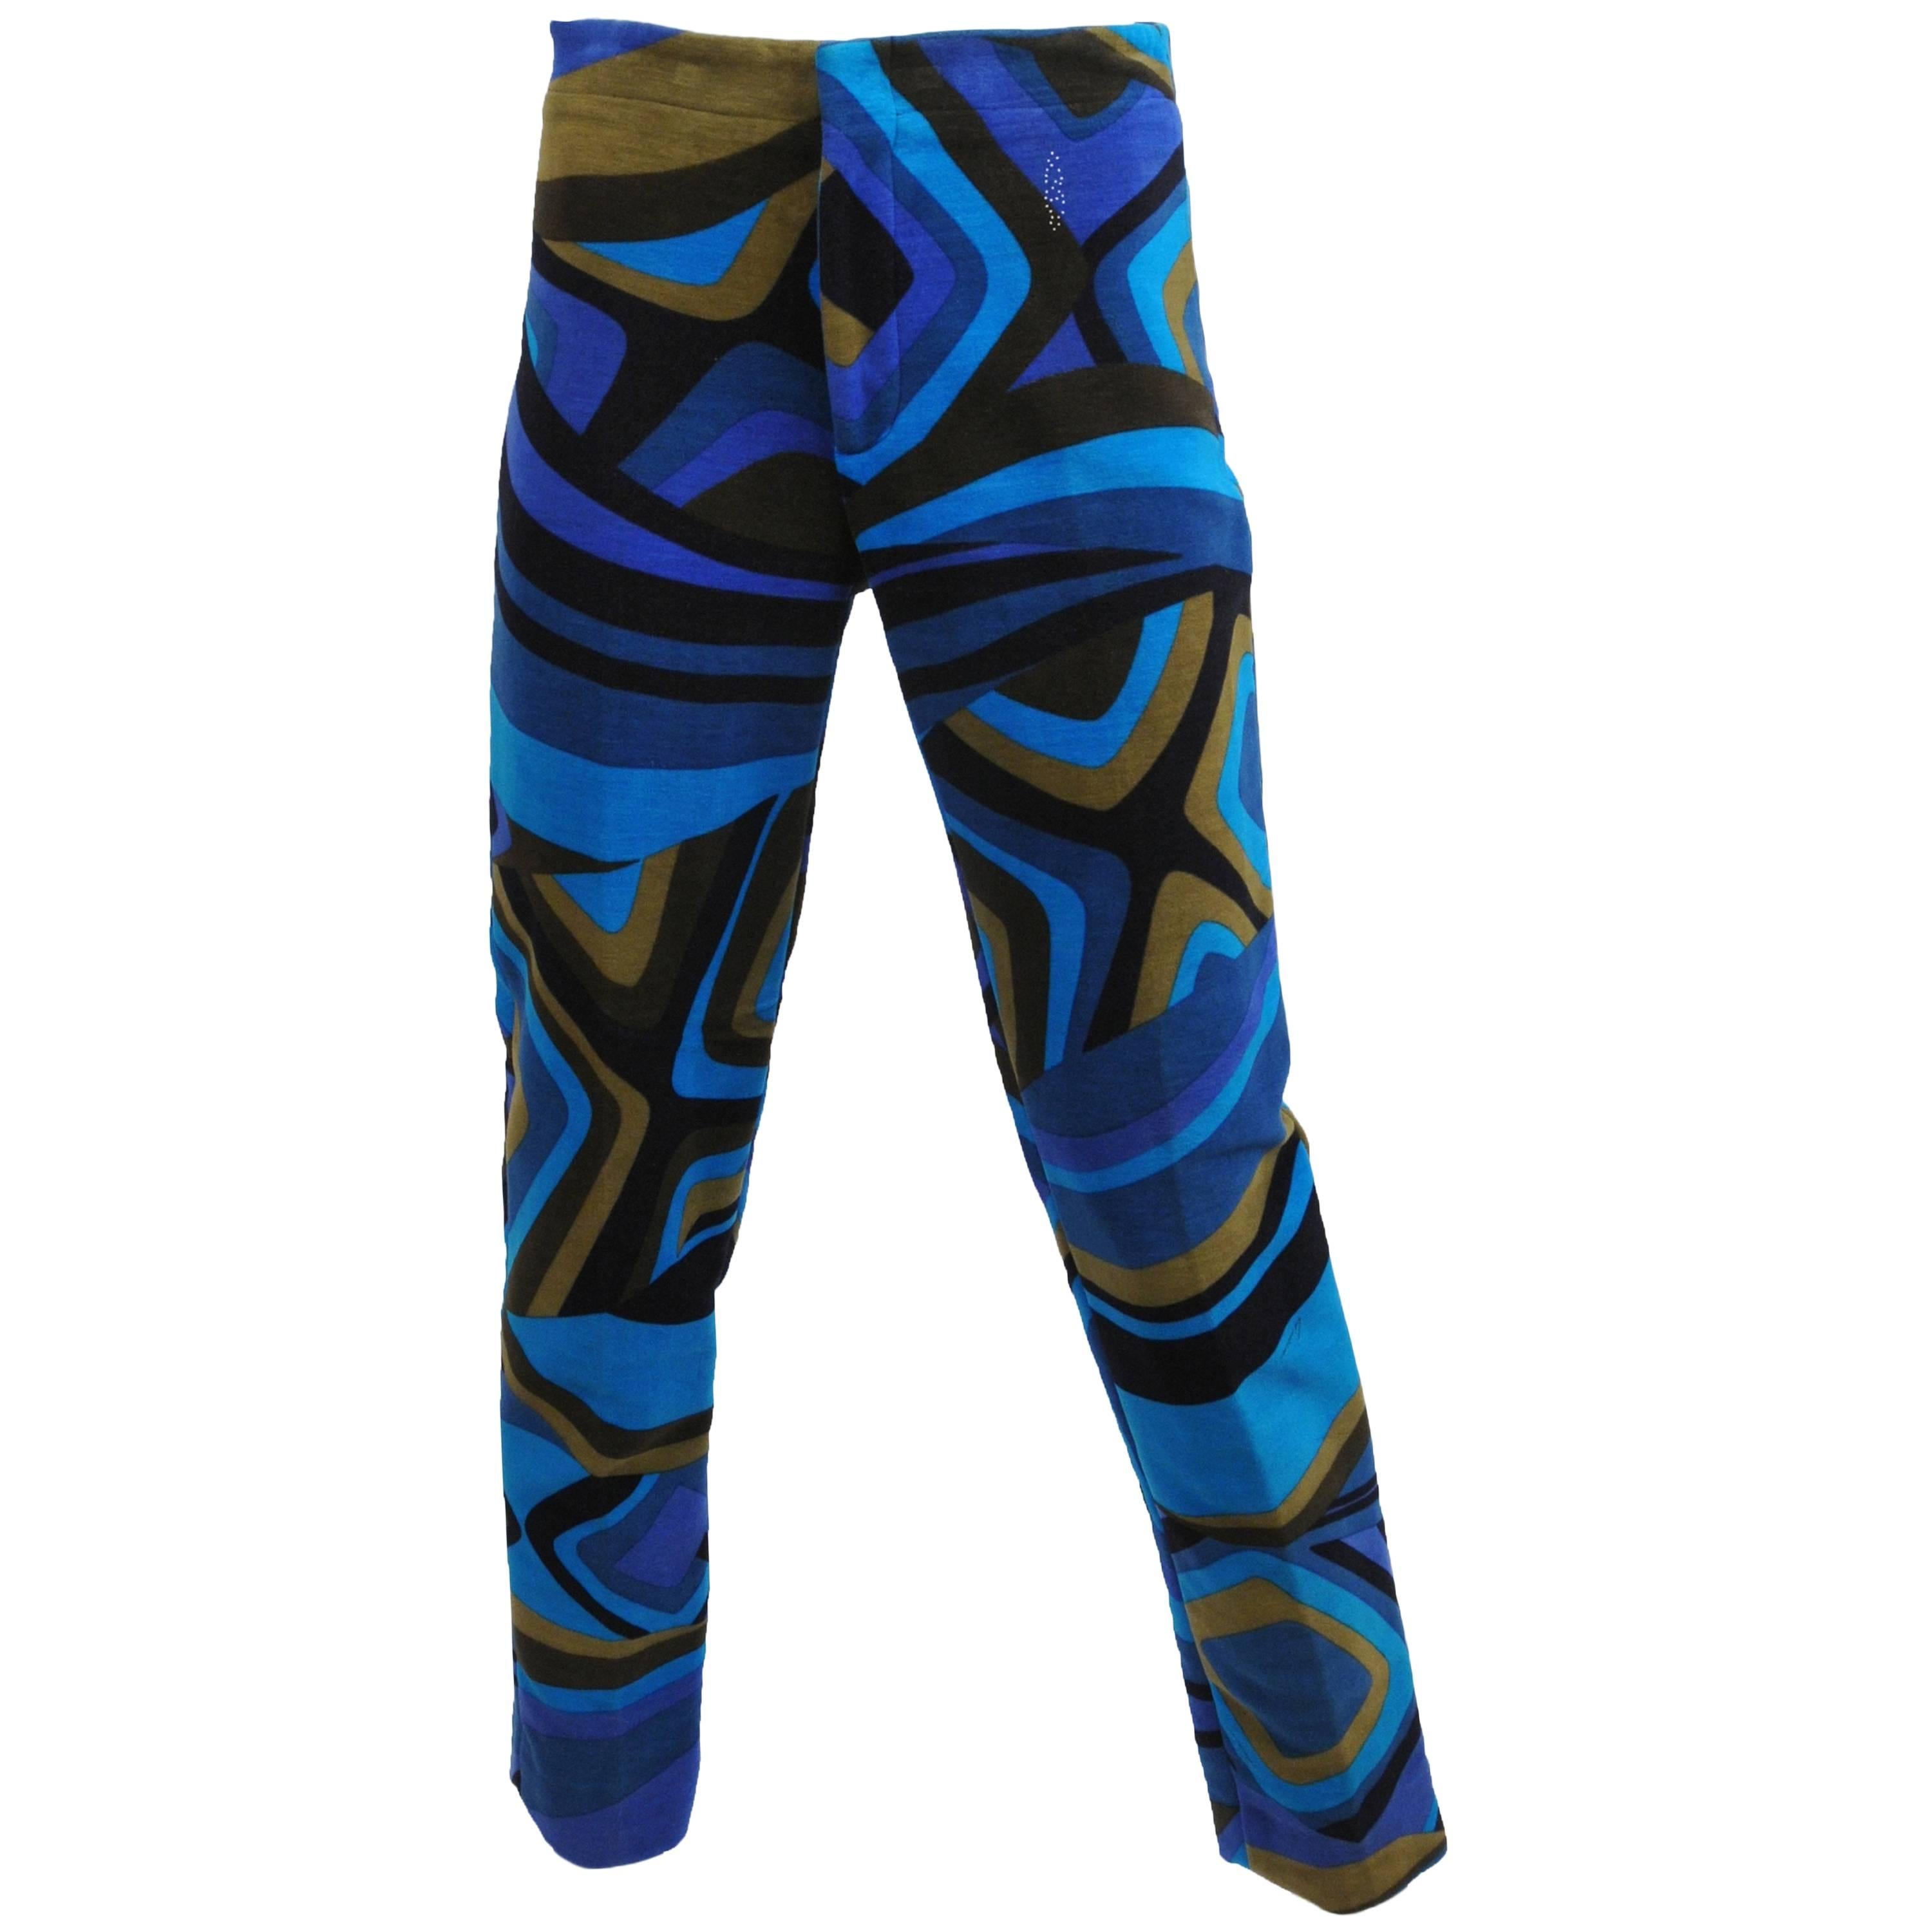 Tom Ford for Gucci Blue Abstract Printed Pants 1990s